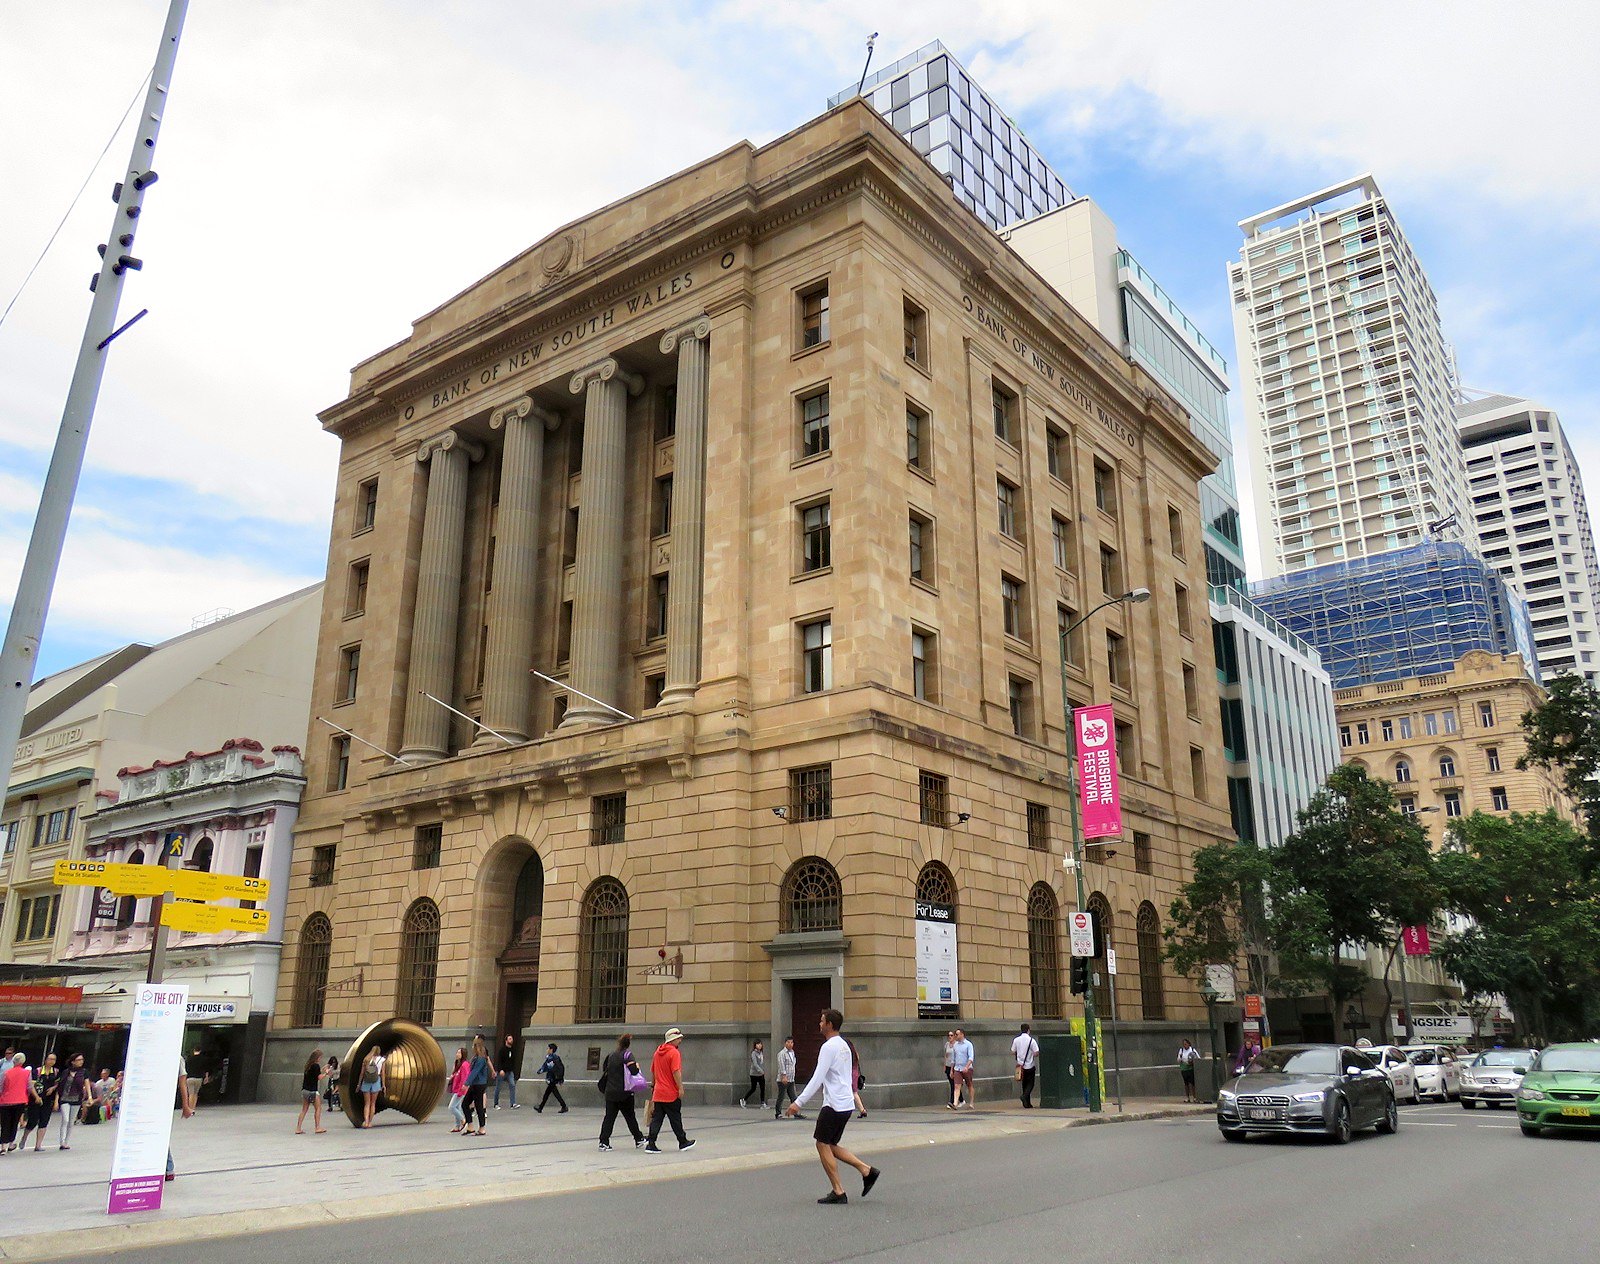 Bank of New South Wales, Brisbane